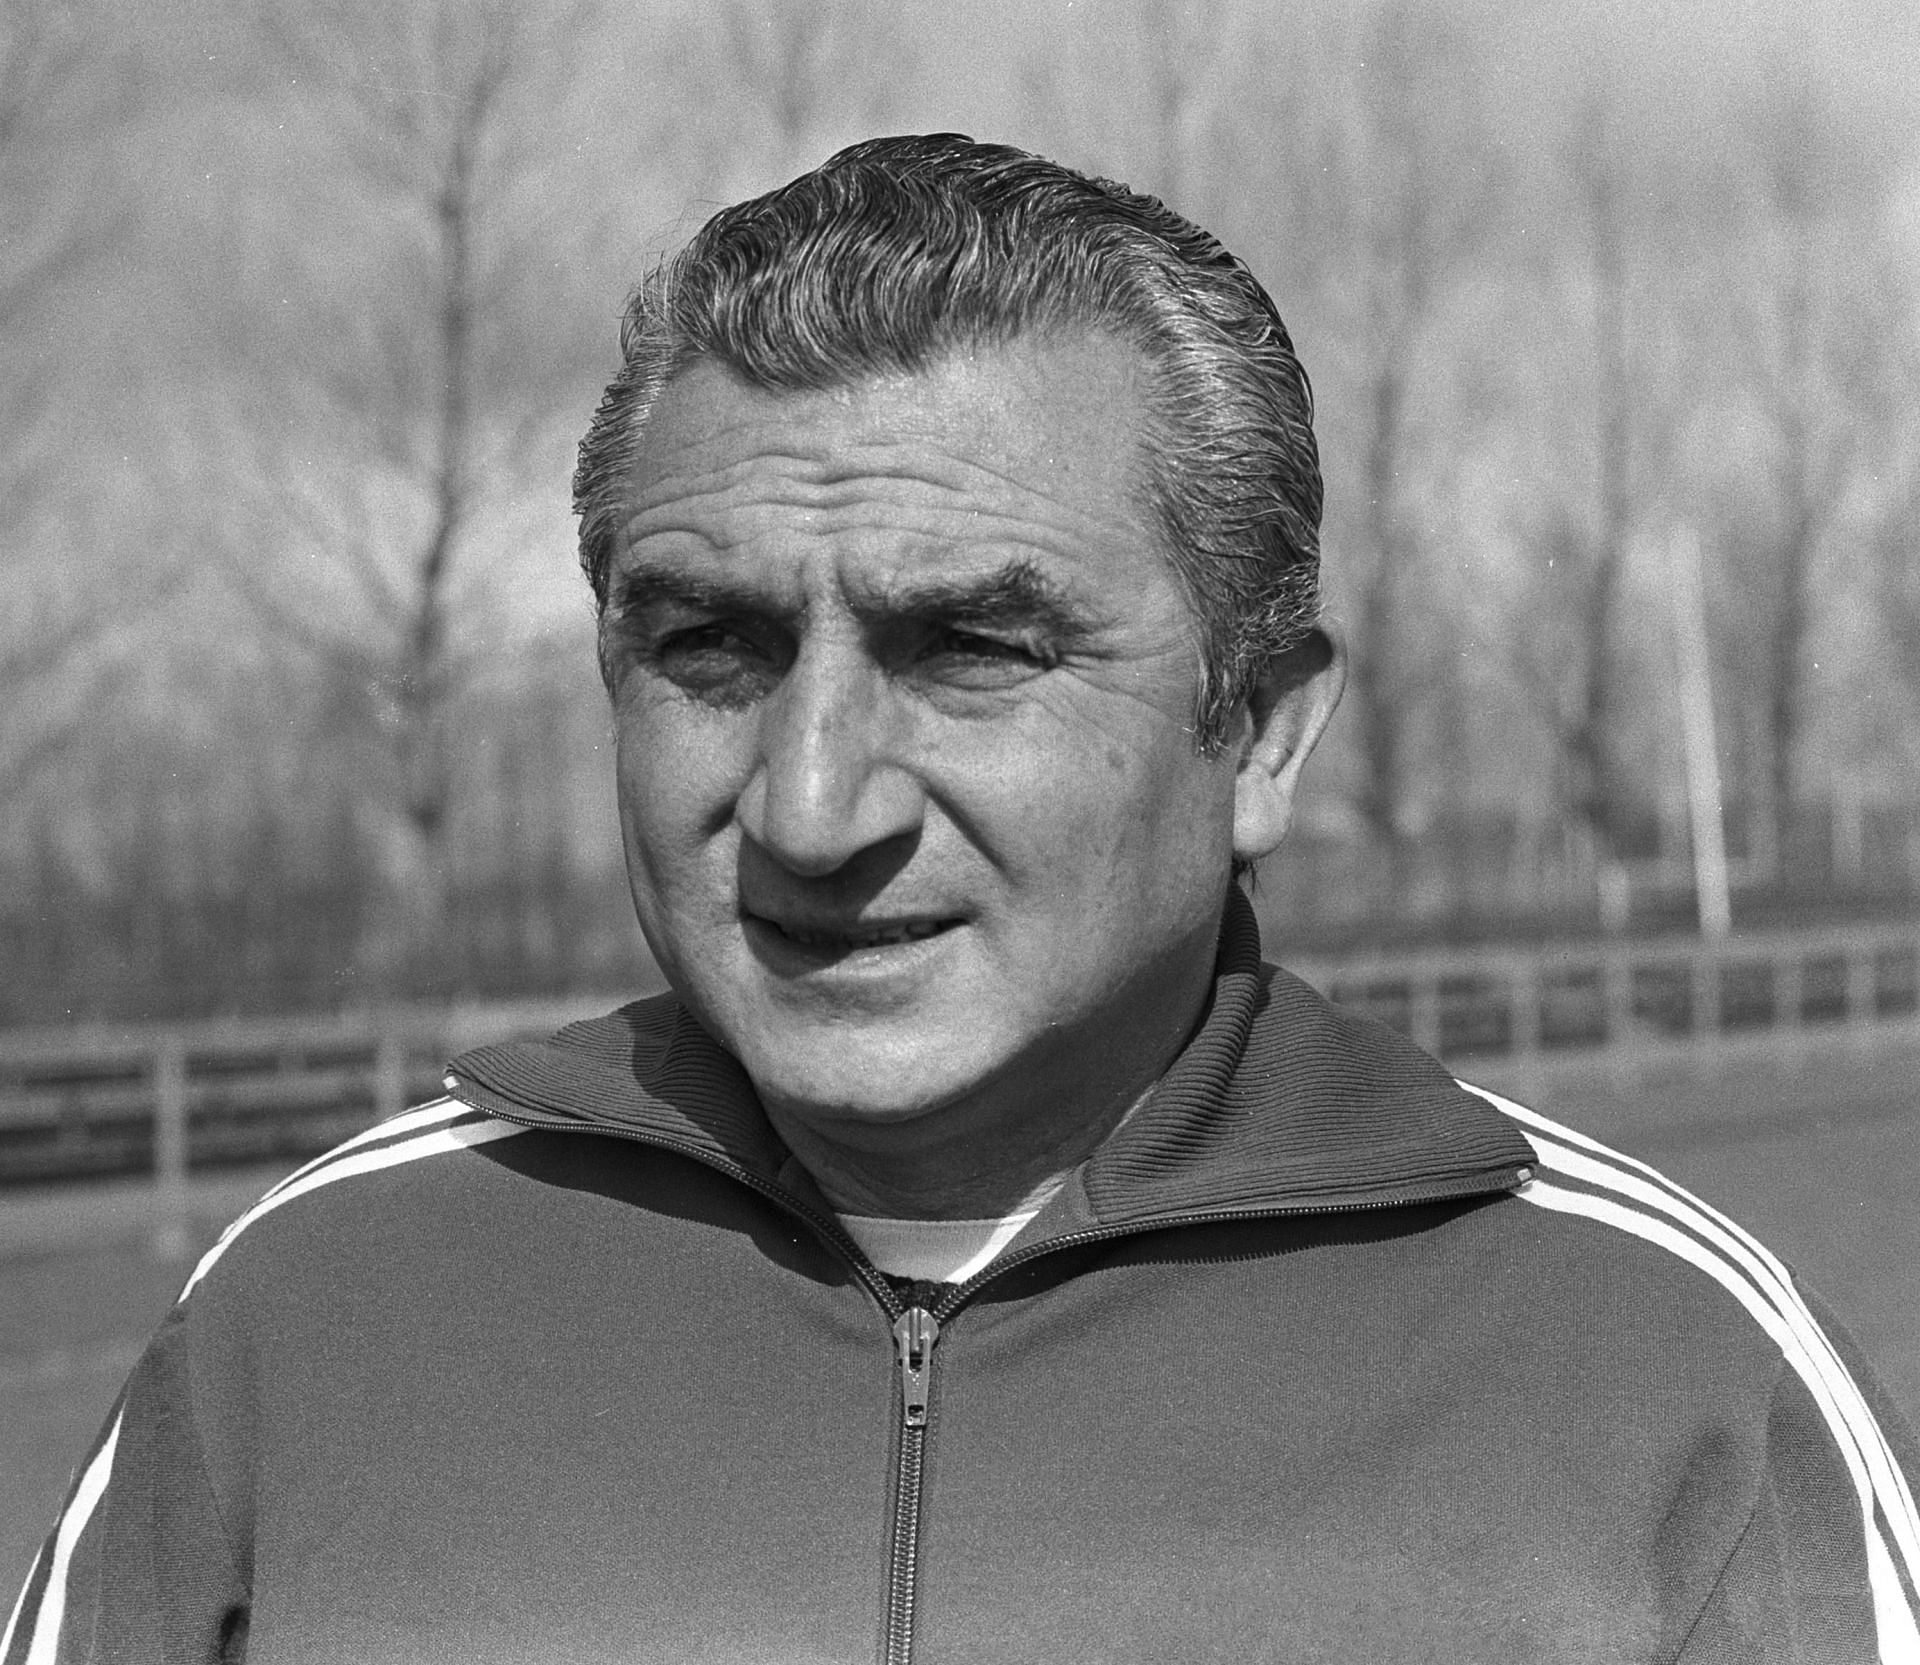 Miguel Mu&ntilde;oz was the first person to win the Champions League as player and manager